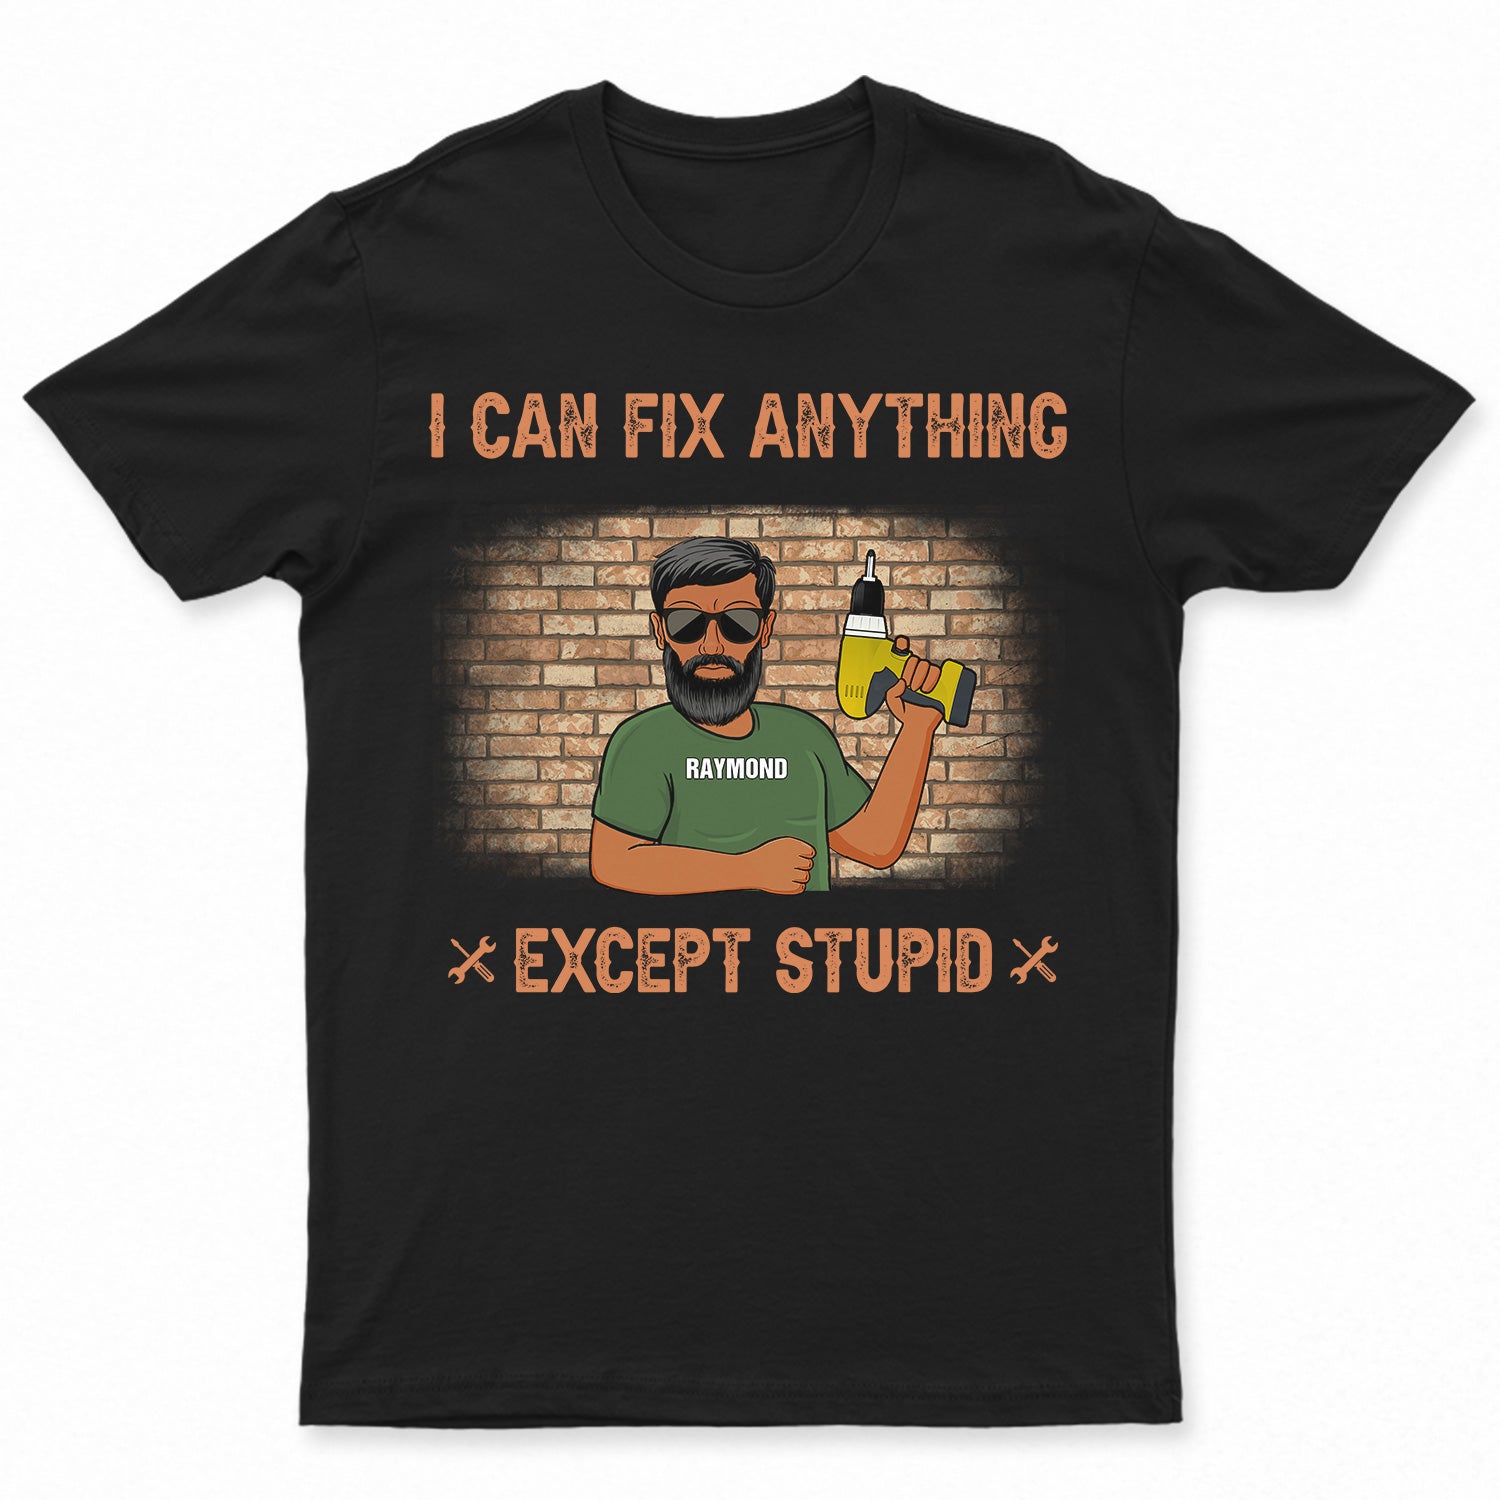 I Can Fix Anything Except Stupid - Birthday Gift For Yourself, Dad, Father, Grandpa, Men, Mechanics - Personalized Custom T Shirt